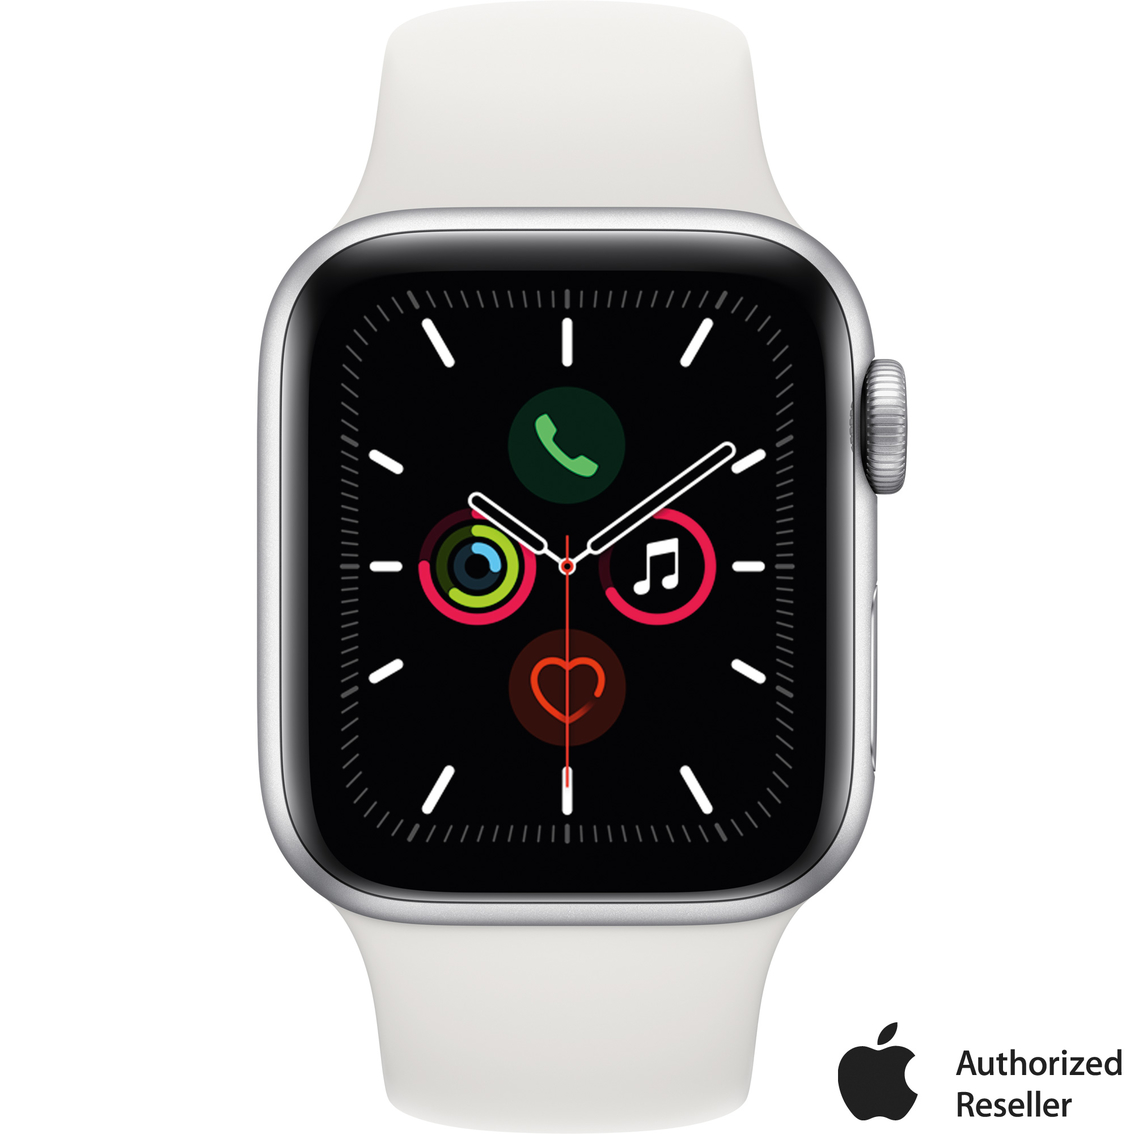 apple watch military exchange